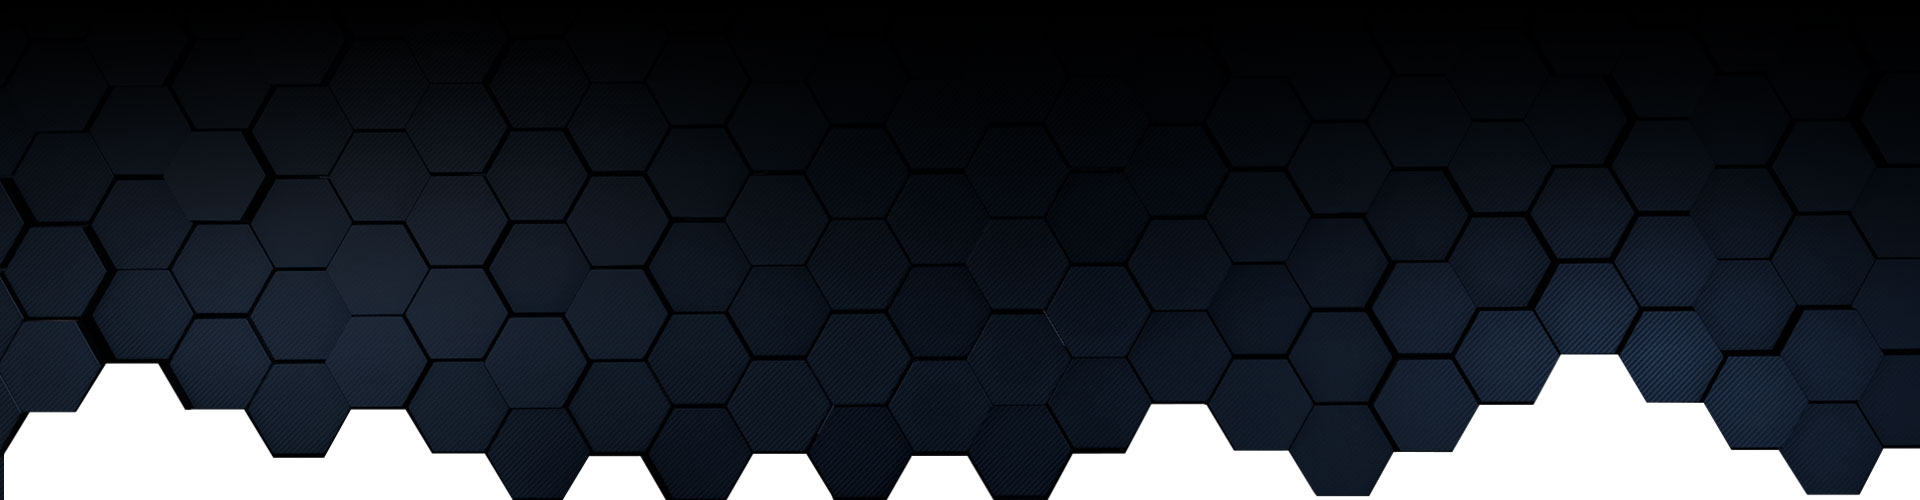 Ombre black to blue hexagons